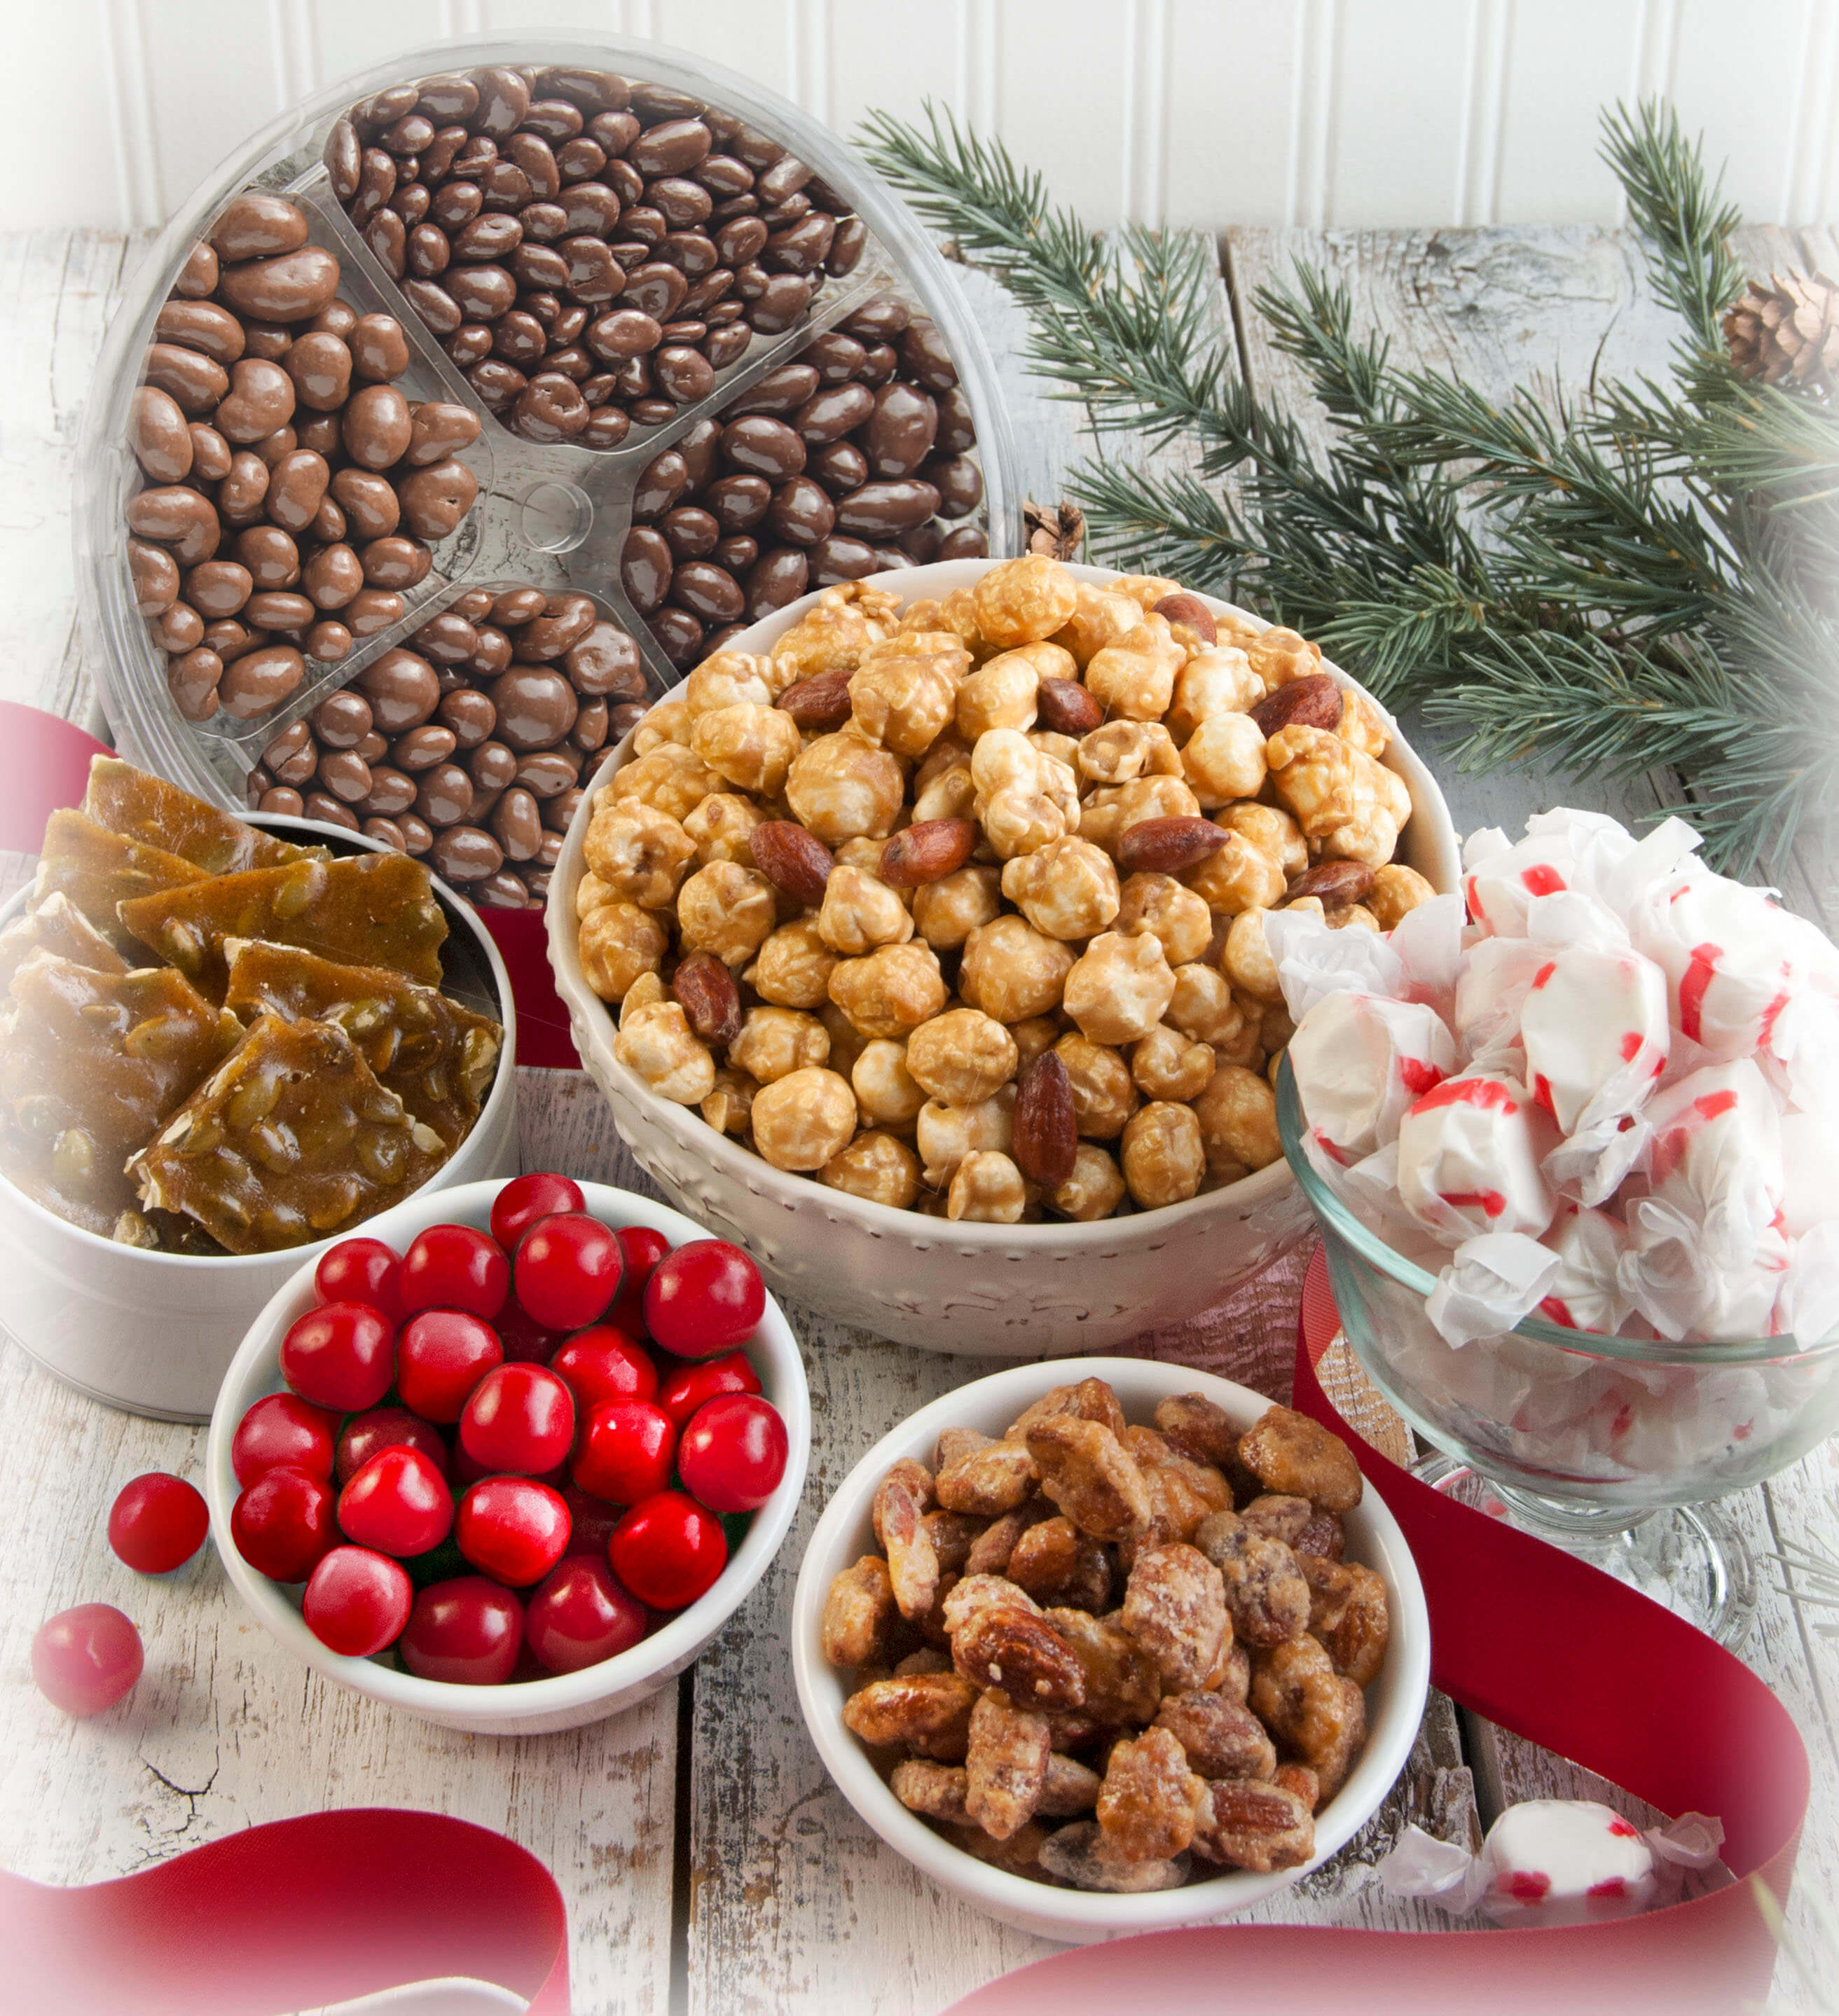 Seasonal Favorites Available Year-Round | Lehi Valley Trading Co.